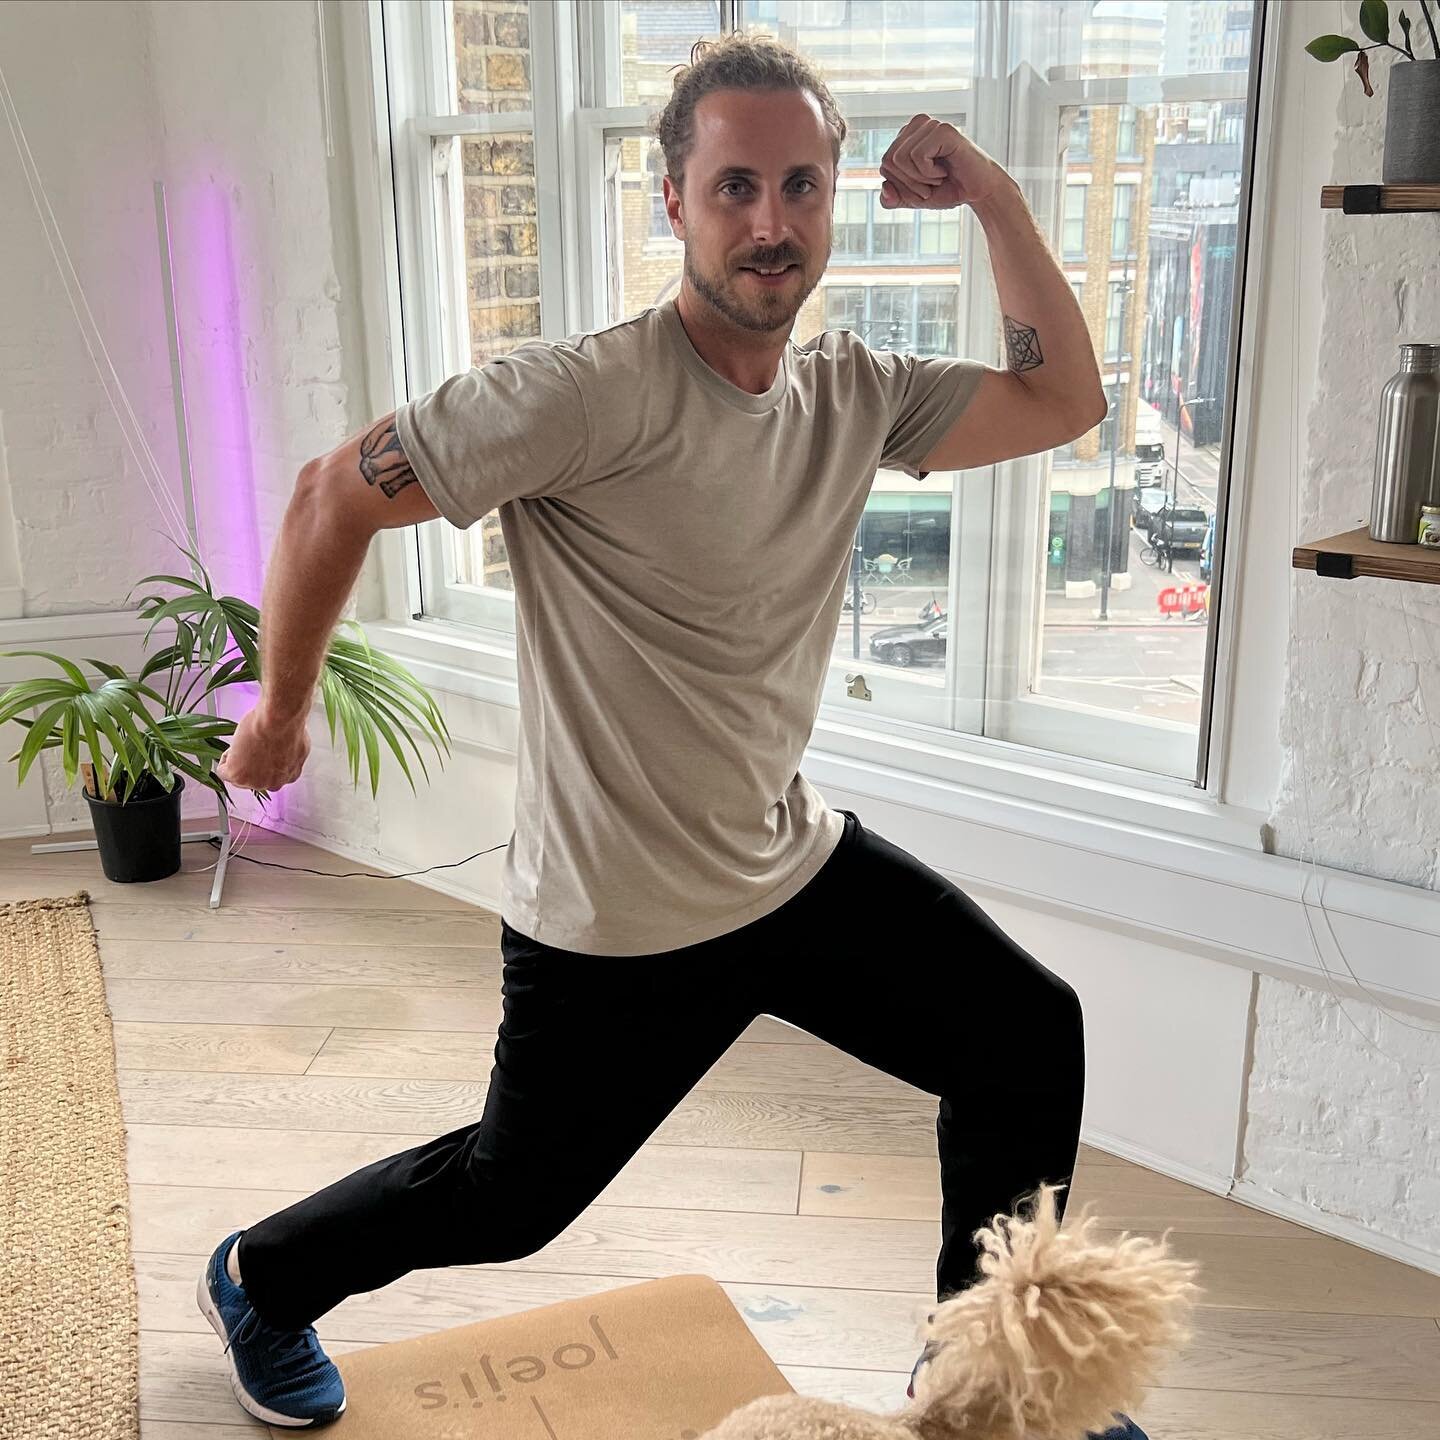 Good luck to Fynn and all our patients running the Hackney Half marathon! 🏃💨

Chiropractic care and massage therapy are essential for runners, especially during marathon preparation and recovery. Here are the benefits:

Injury prevention: Regular c